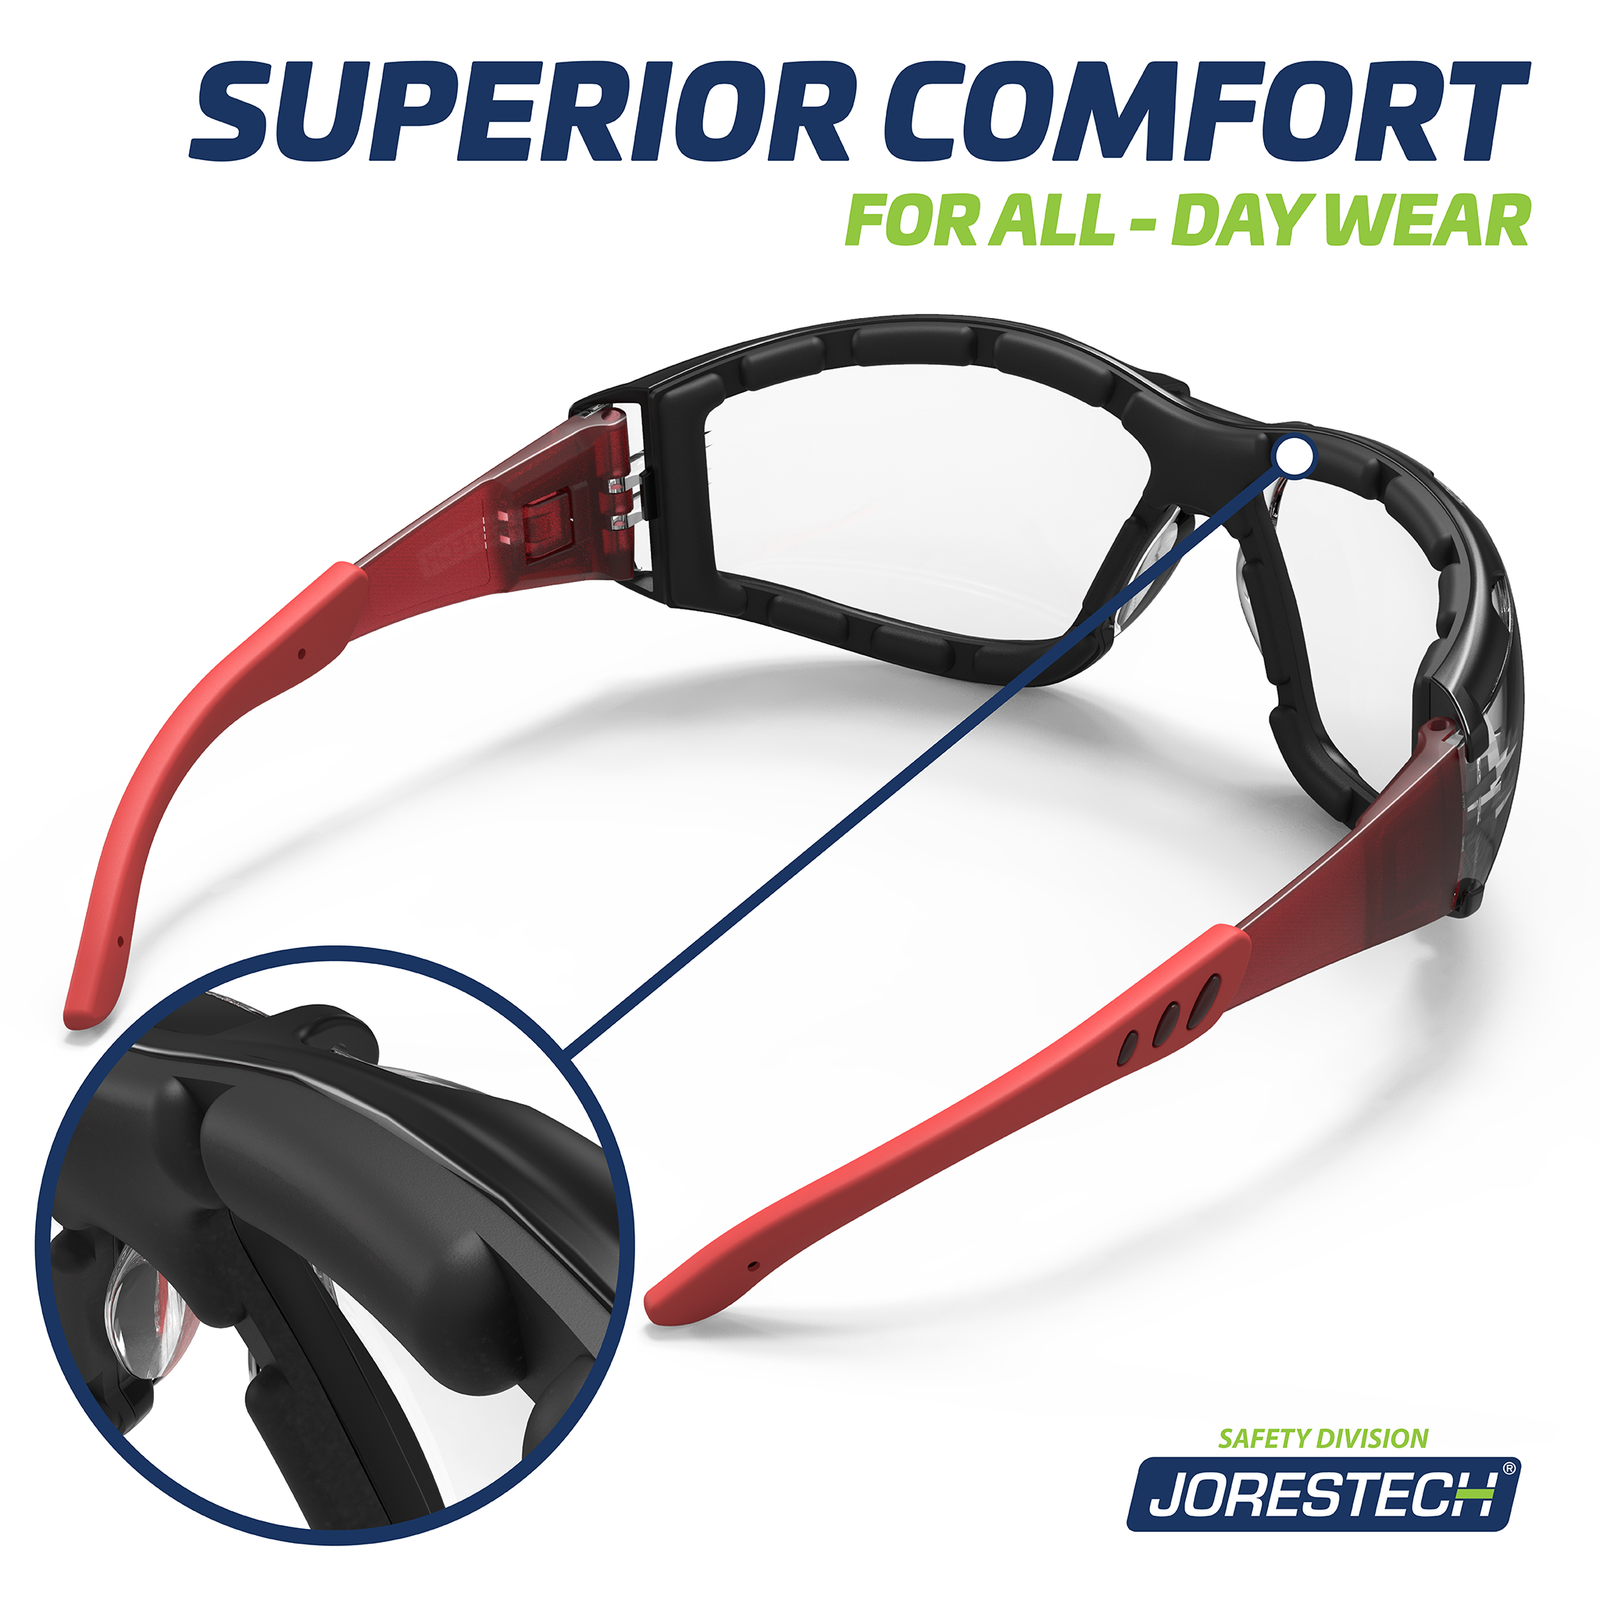 Shows a view of the back of the red and clear JORESTECH anti fog safety glasses convertibles to goggles with removable temples and elastic headband. Close up of the foam gasket is shown in a circle and text reads superior comfort for all day wear.